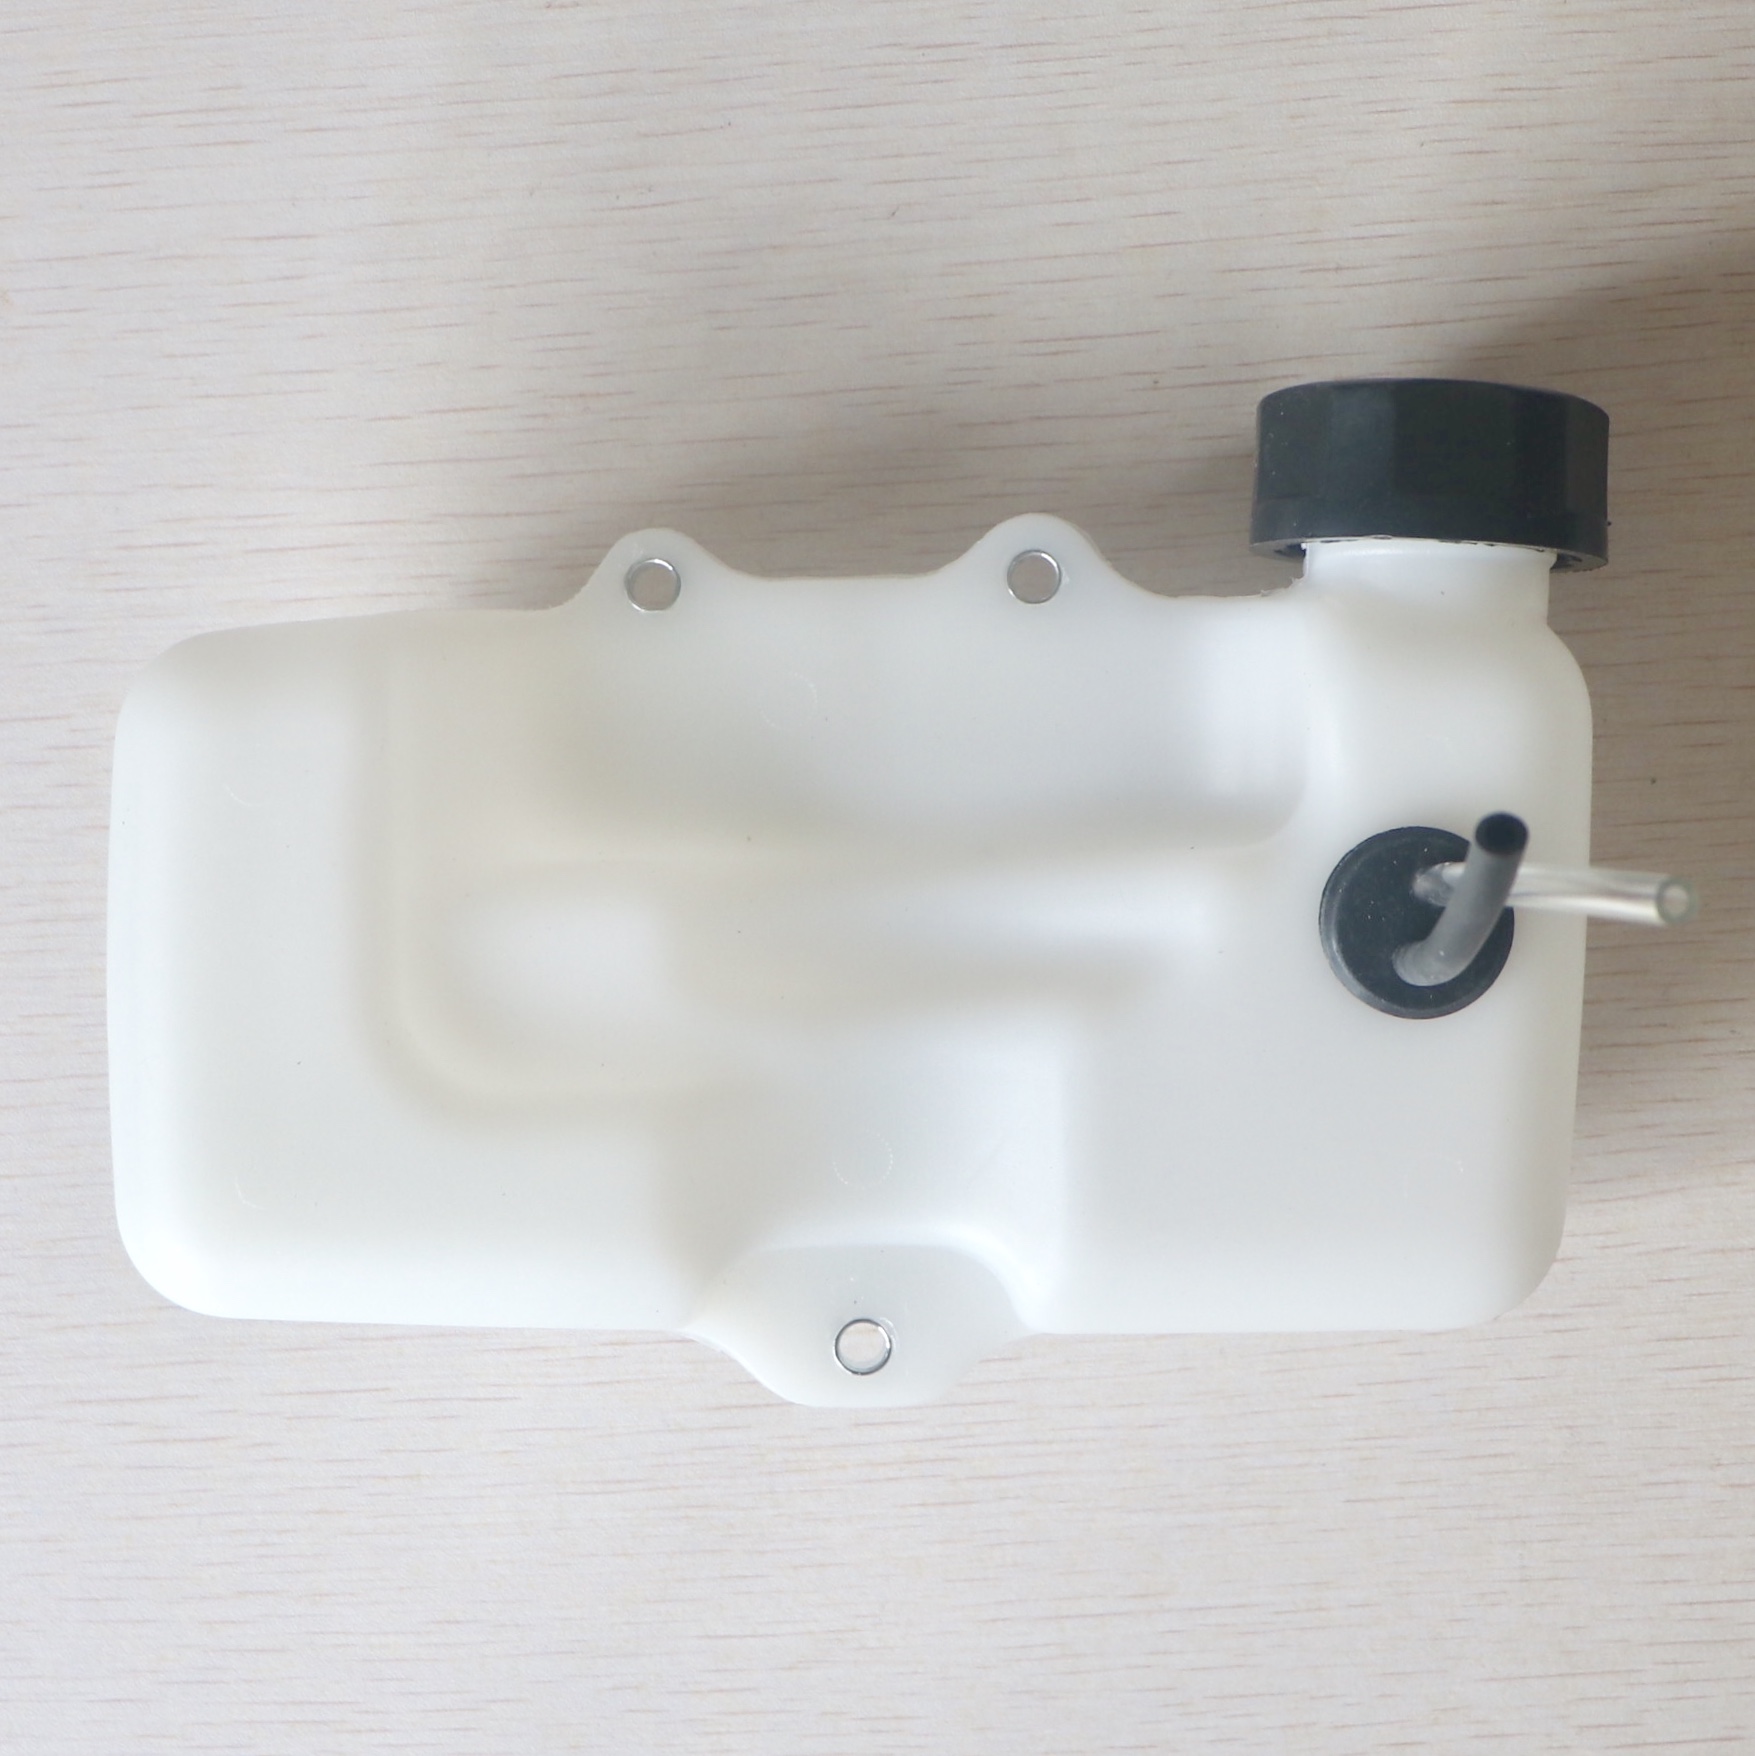 32-8 Fuel Tank for Hedge Trimmer Grass Trimmer Brush Cutter